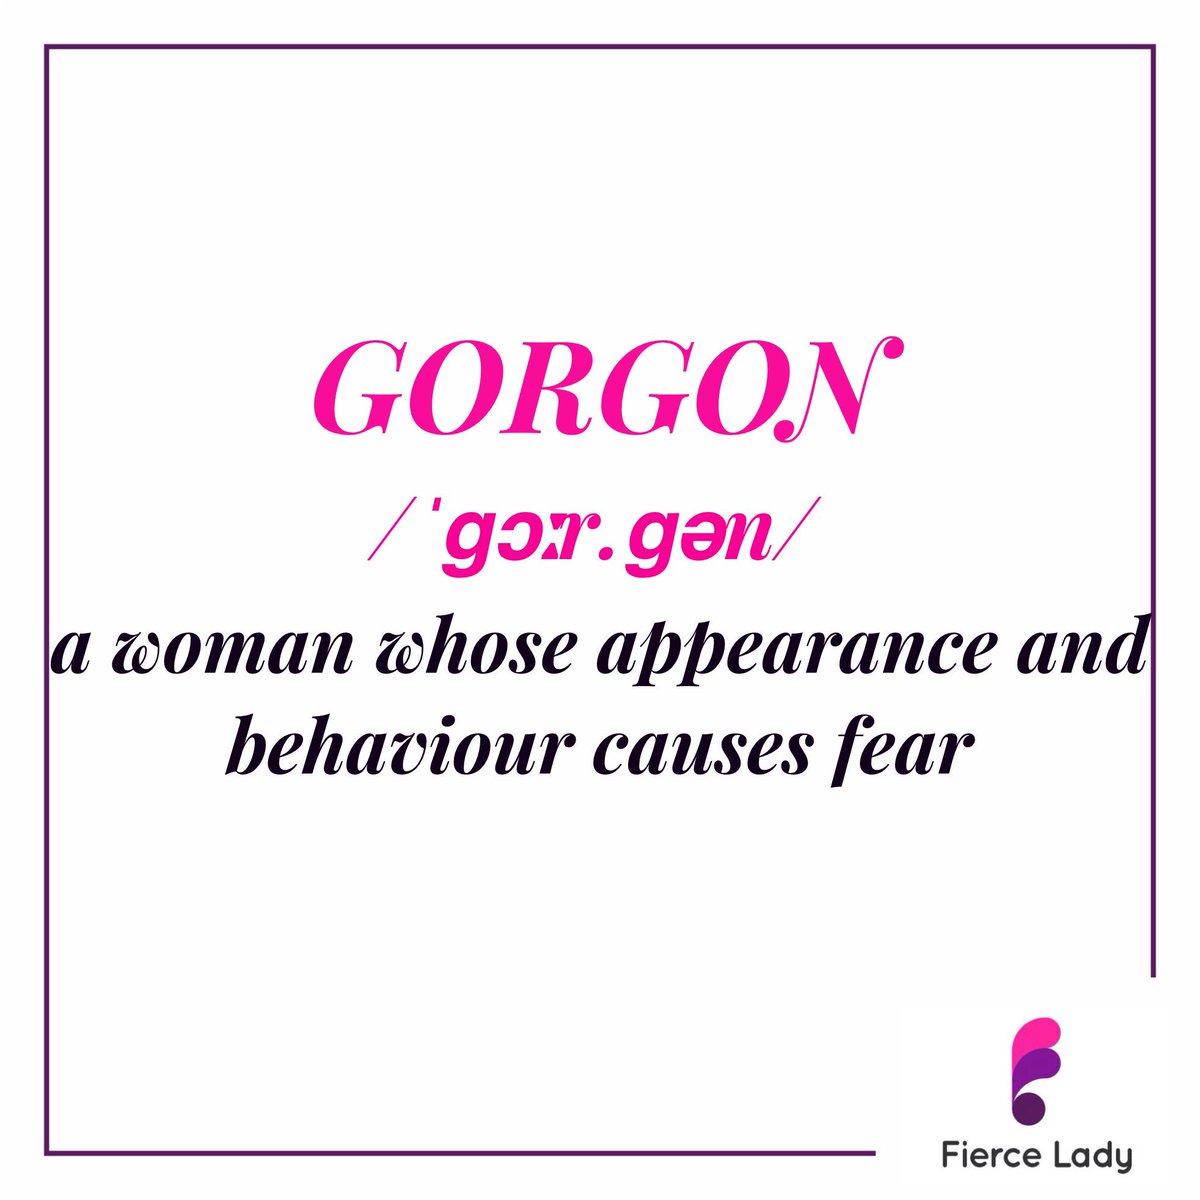 Gorgon
Example: Our teacher is a real gorgon!
___
#TFLady #SupportingCauses #Wordnesday #Learning #Women #BusinessWoman #Girls #GrowthHack